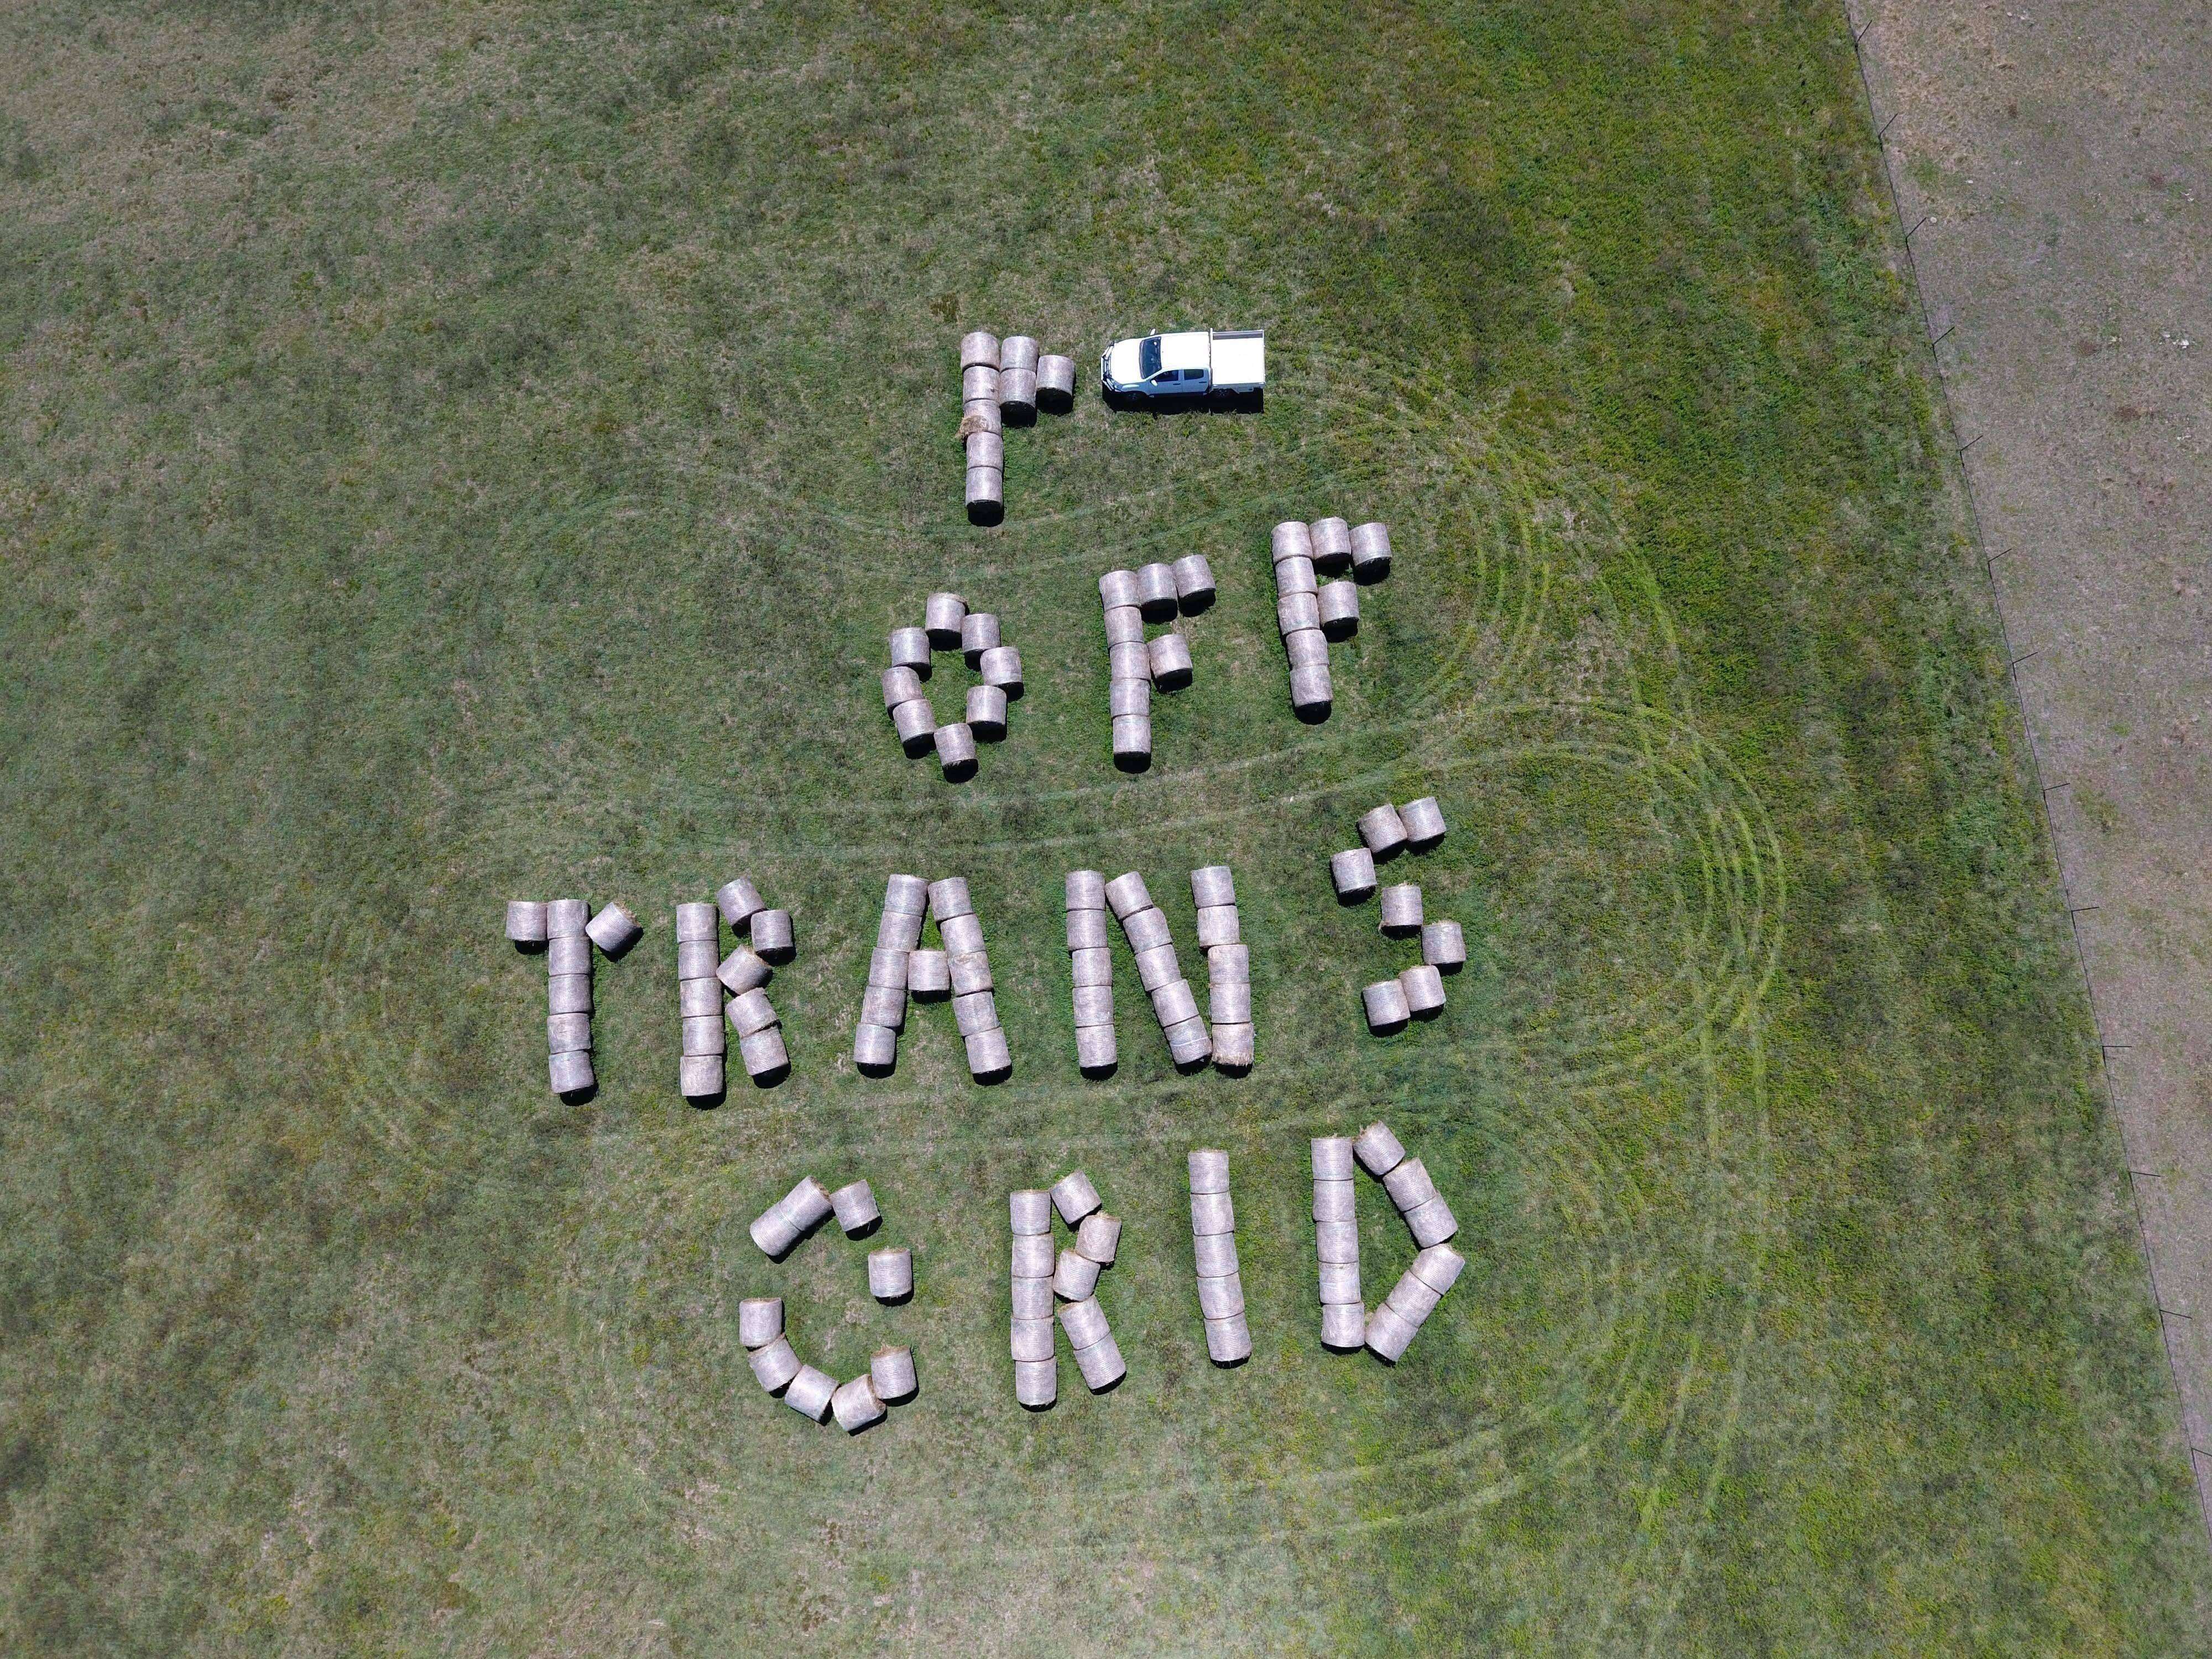 NSW farmer creates hay bale sign to protest against powerline project